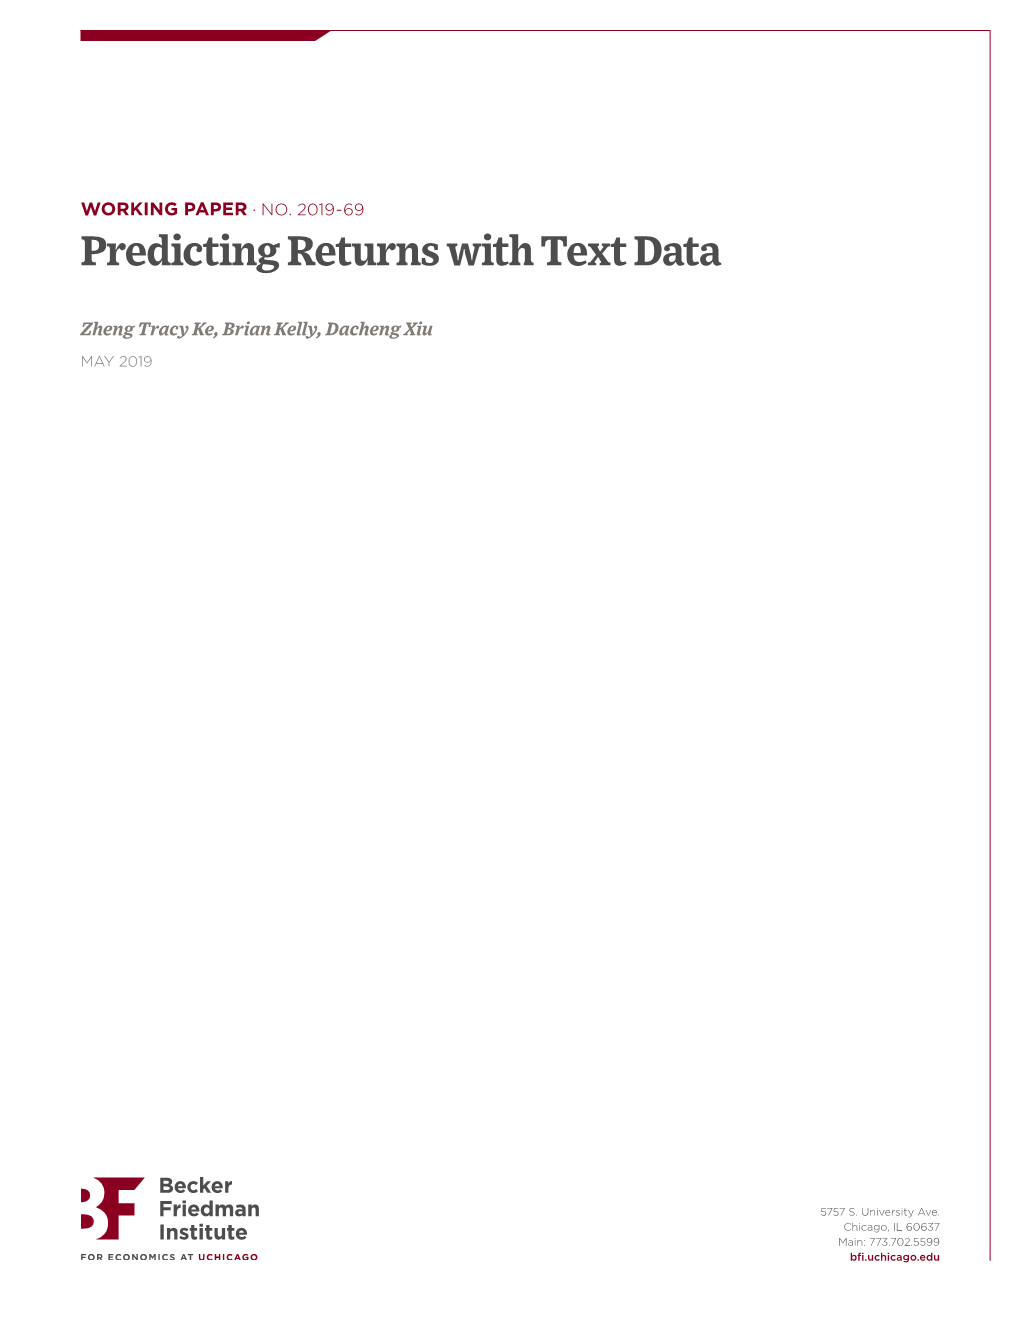 Predicting Returns with Text Data